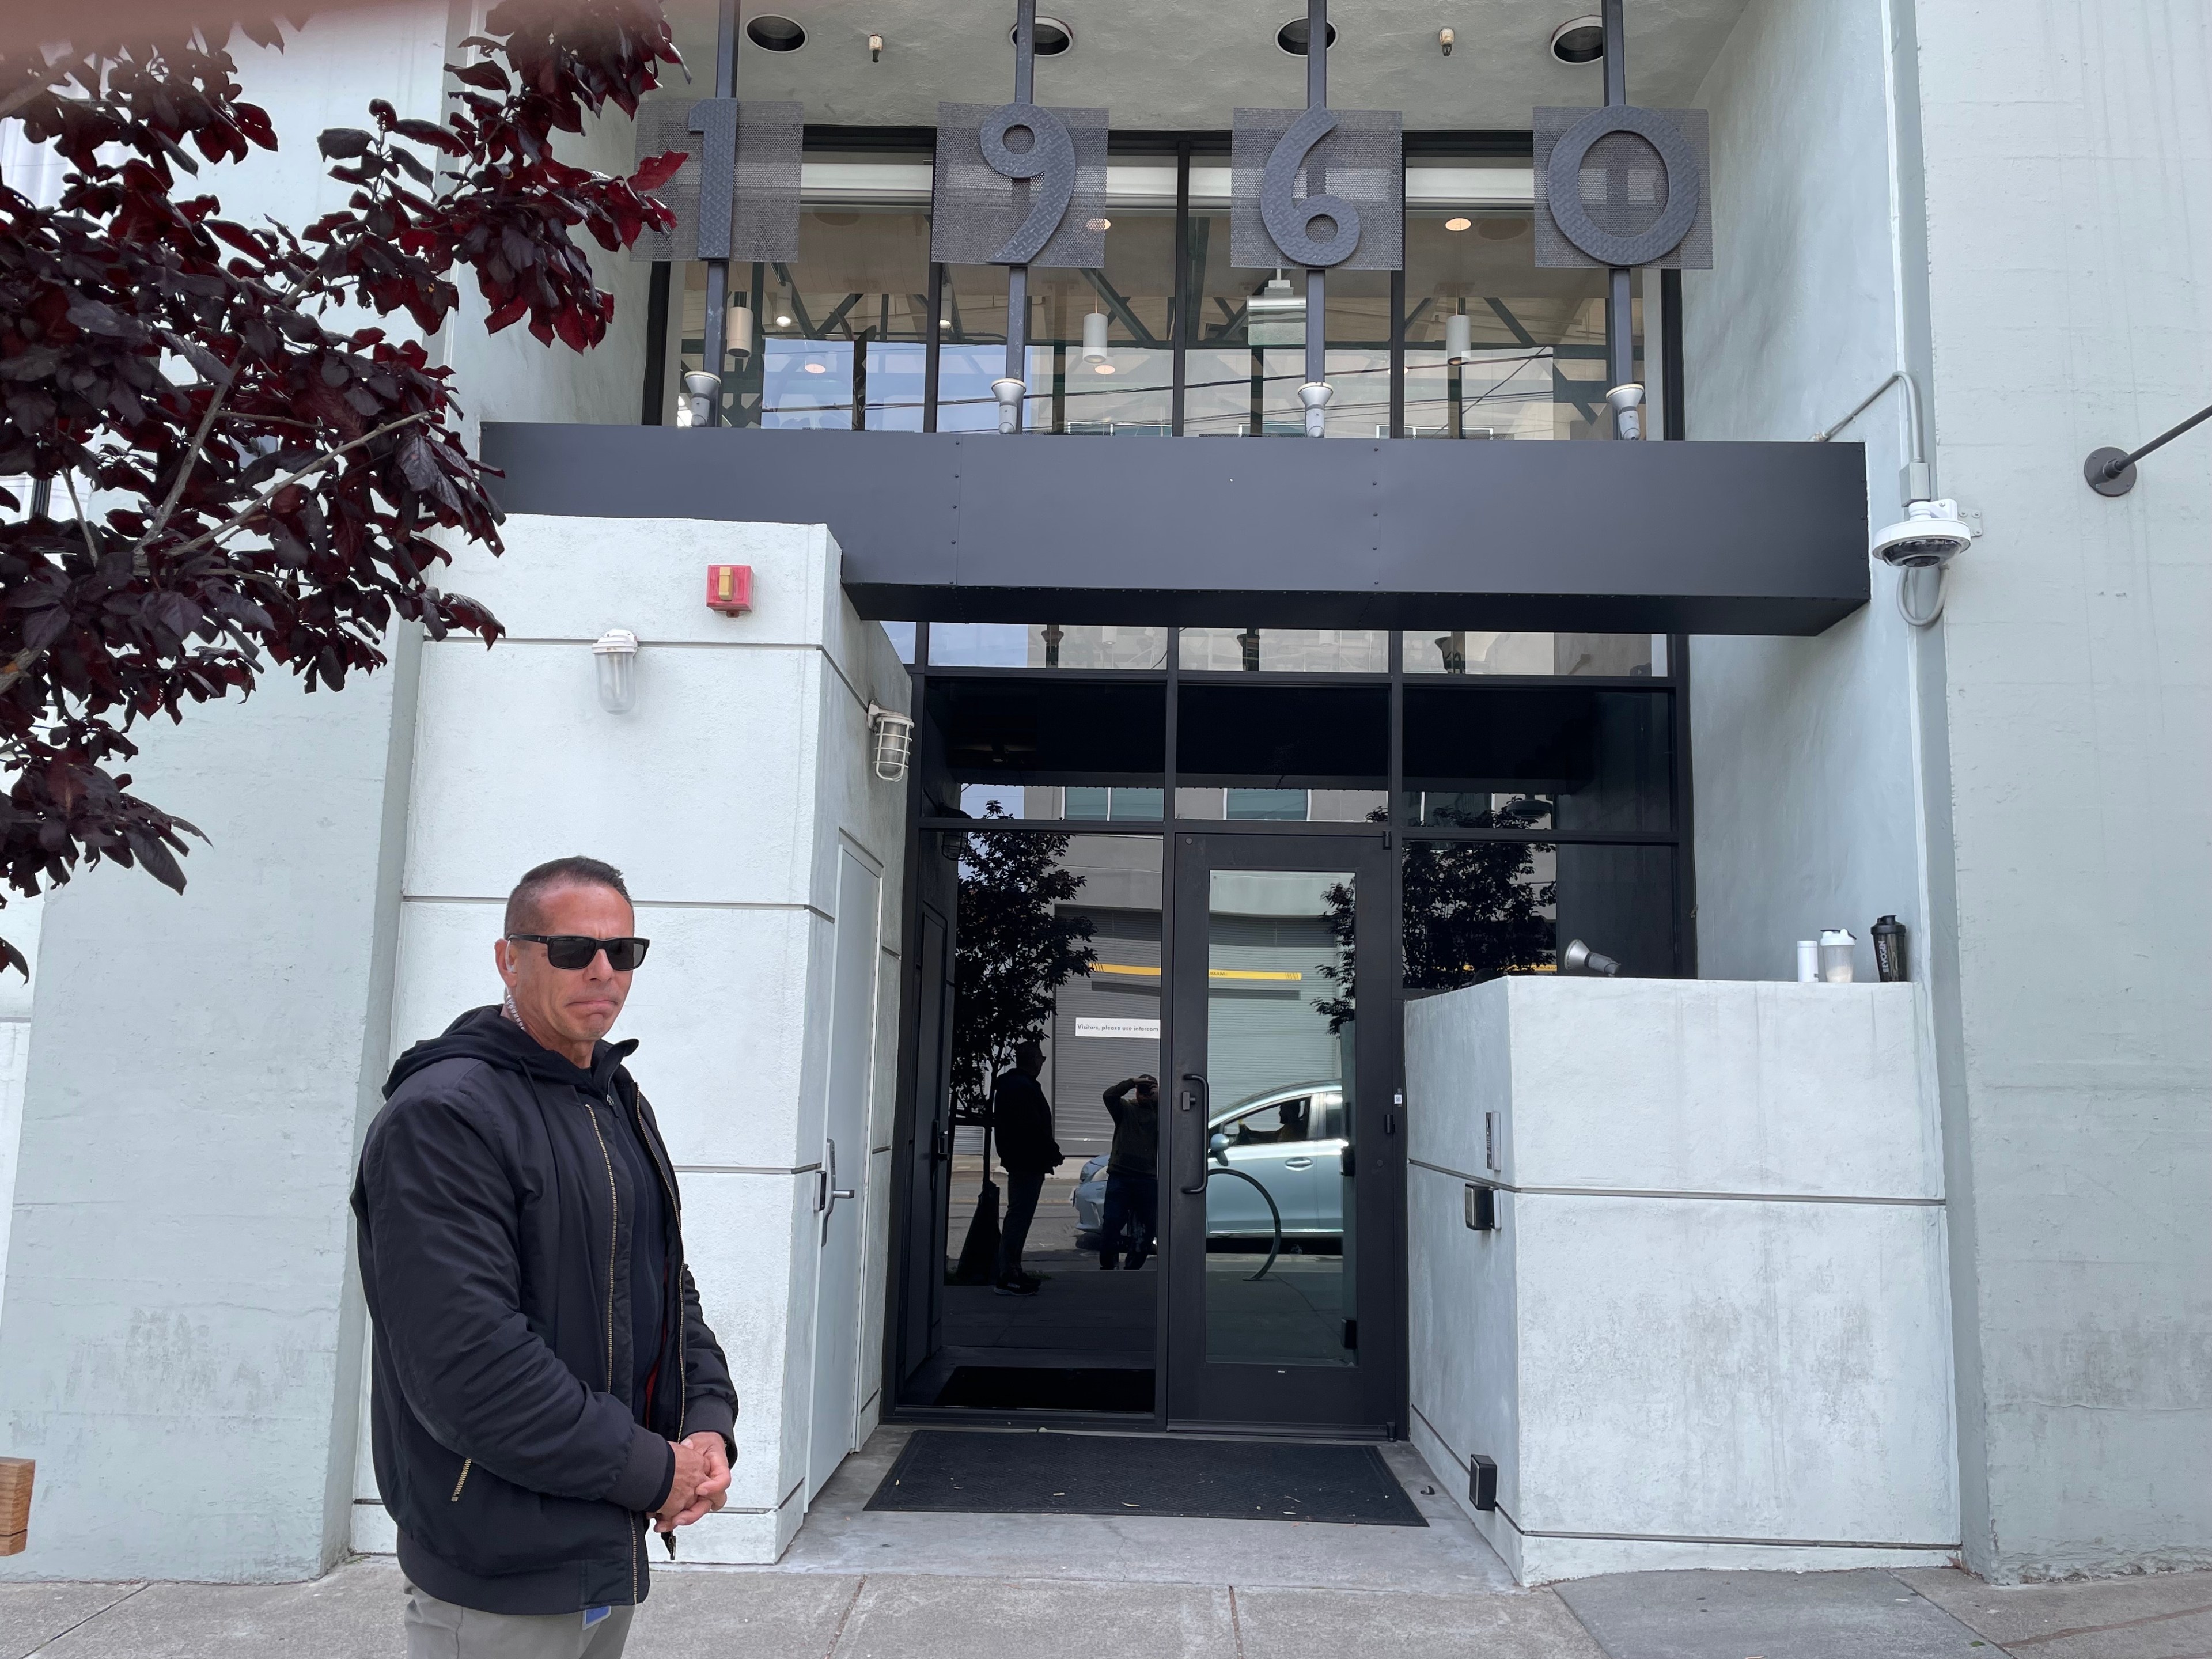 A man wearing sunglasses and an earpiece stands outside an office building.